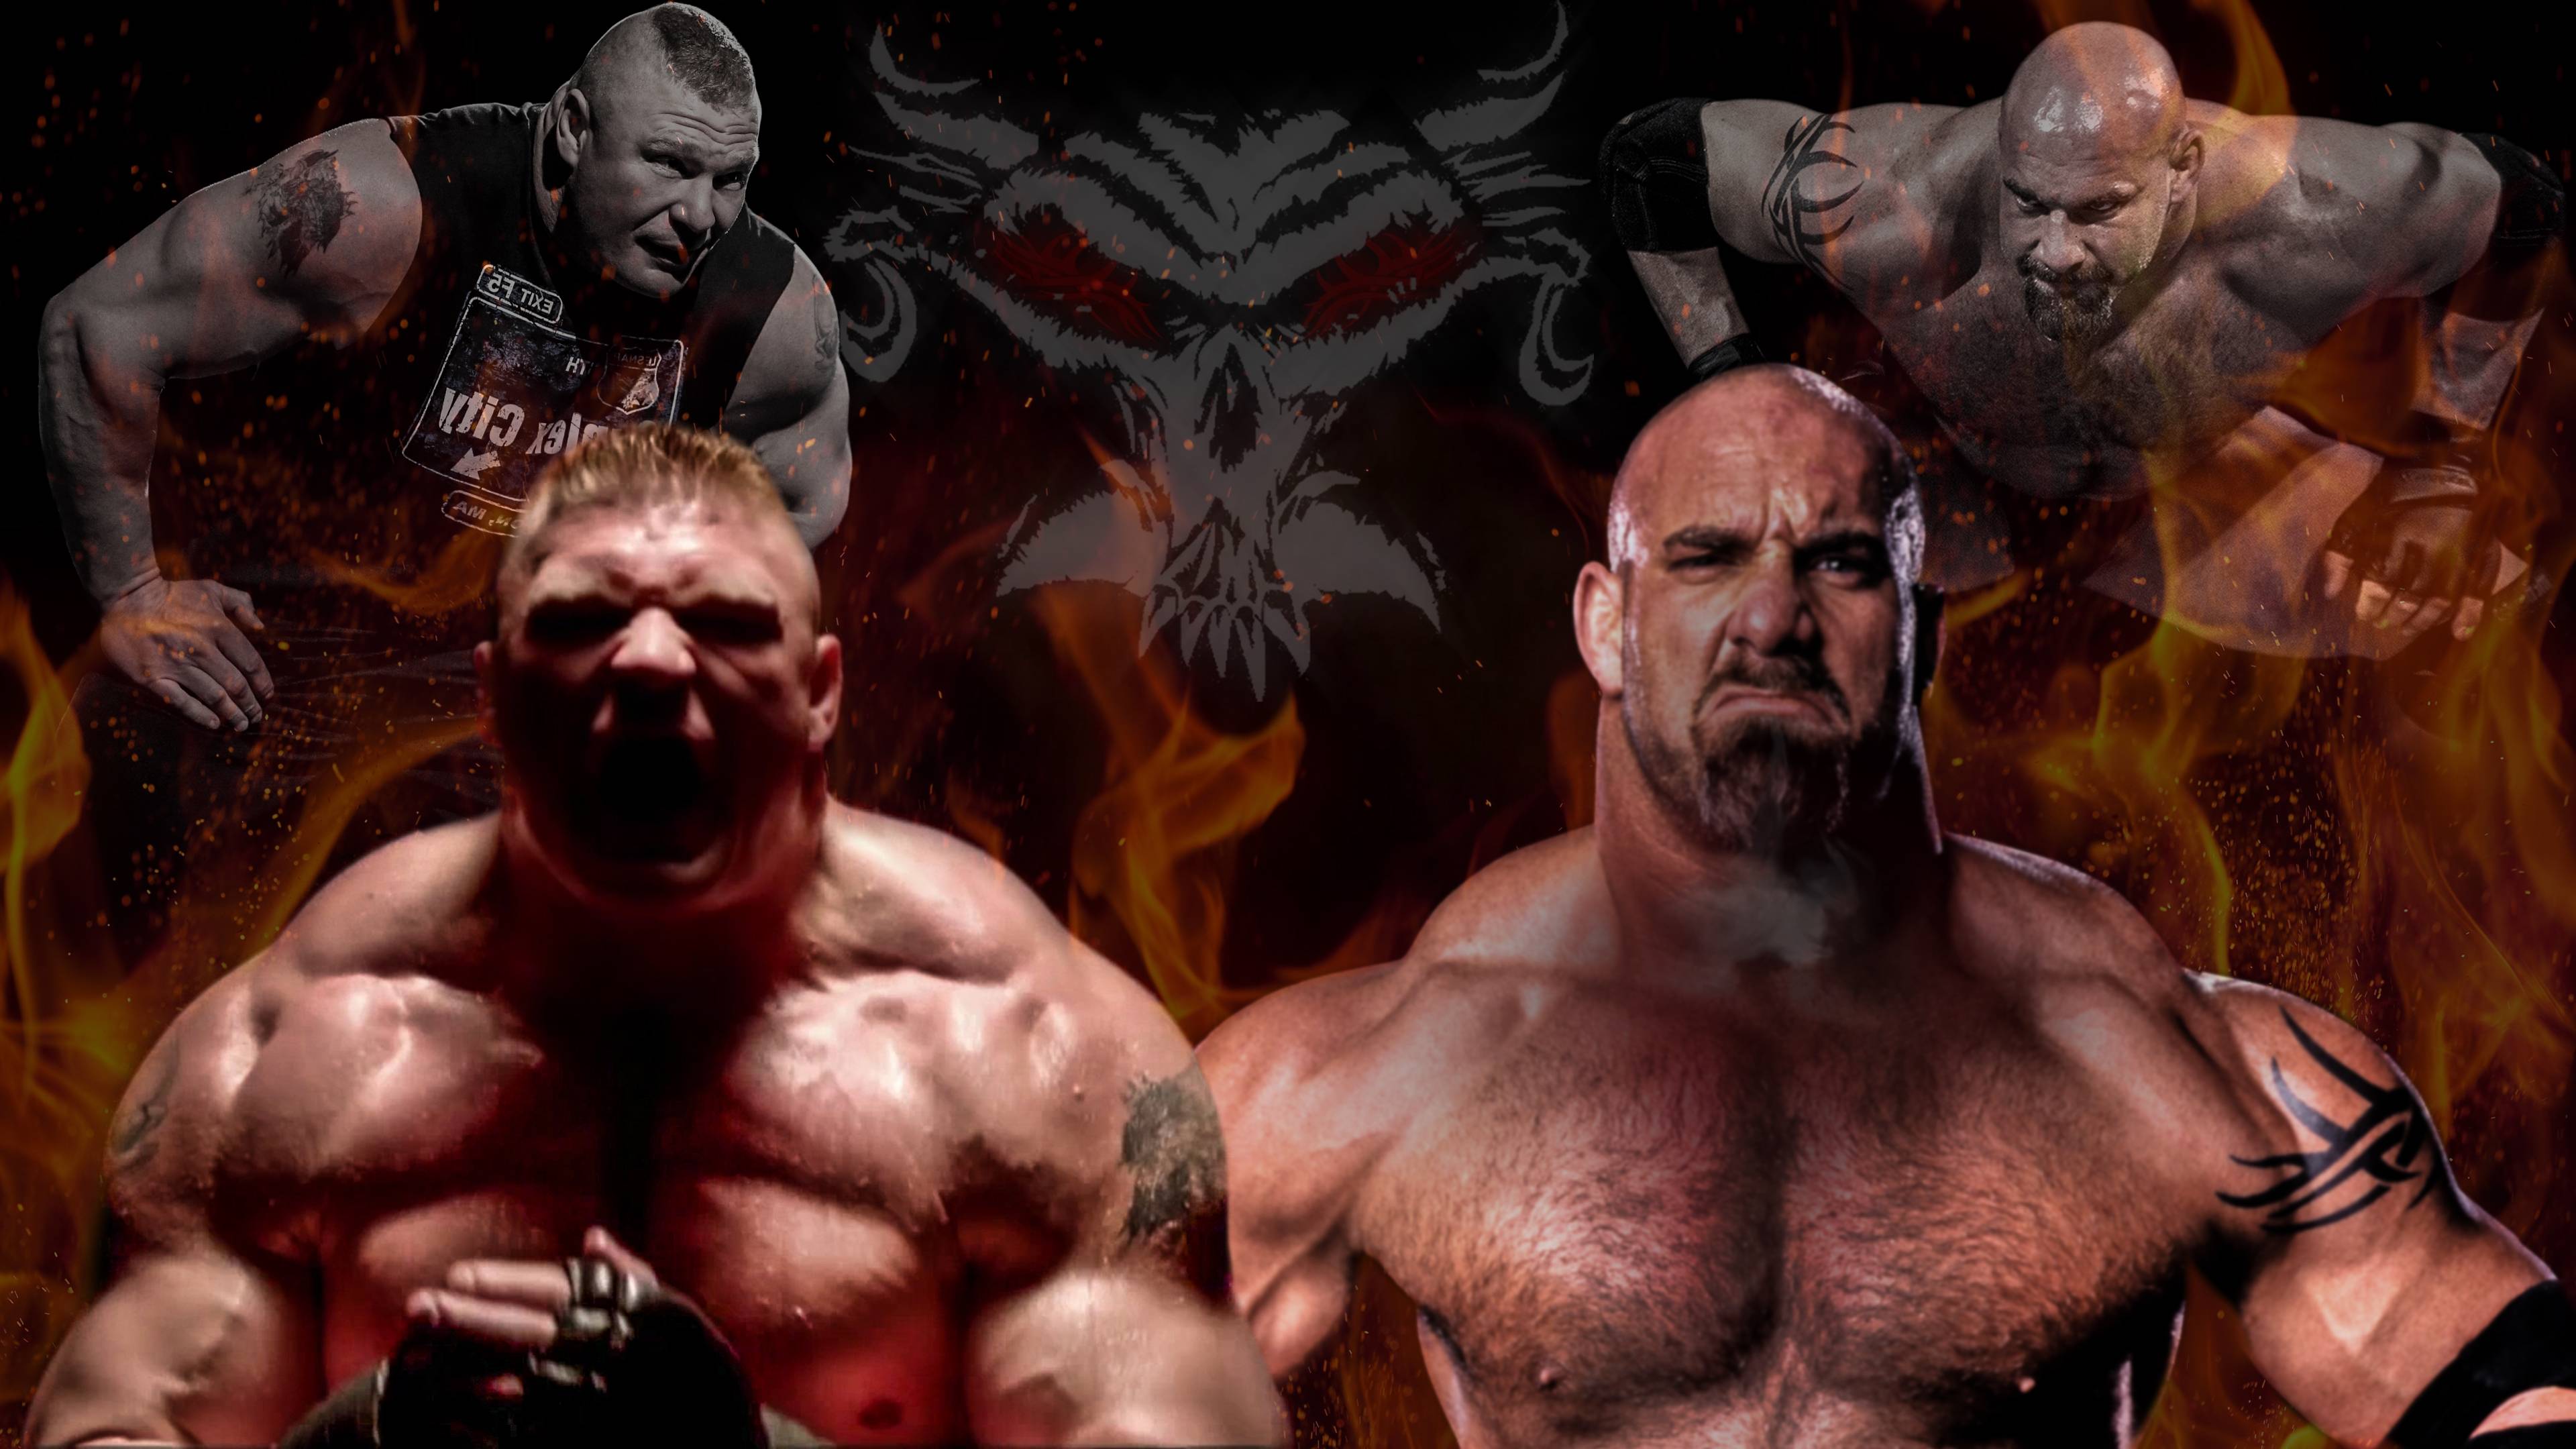 I just made my first wallpaper - Brock Lesnar vs Goldberg. What do you think?